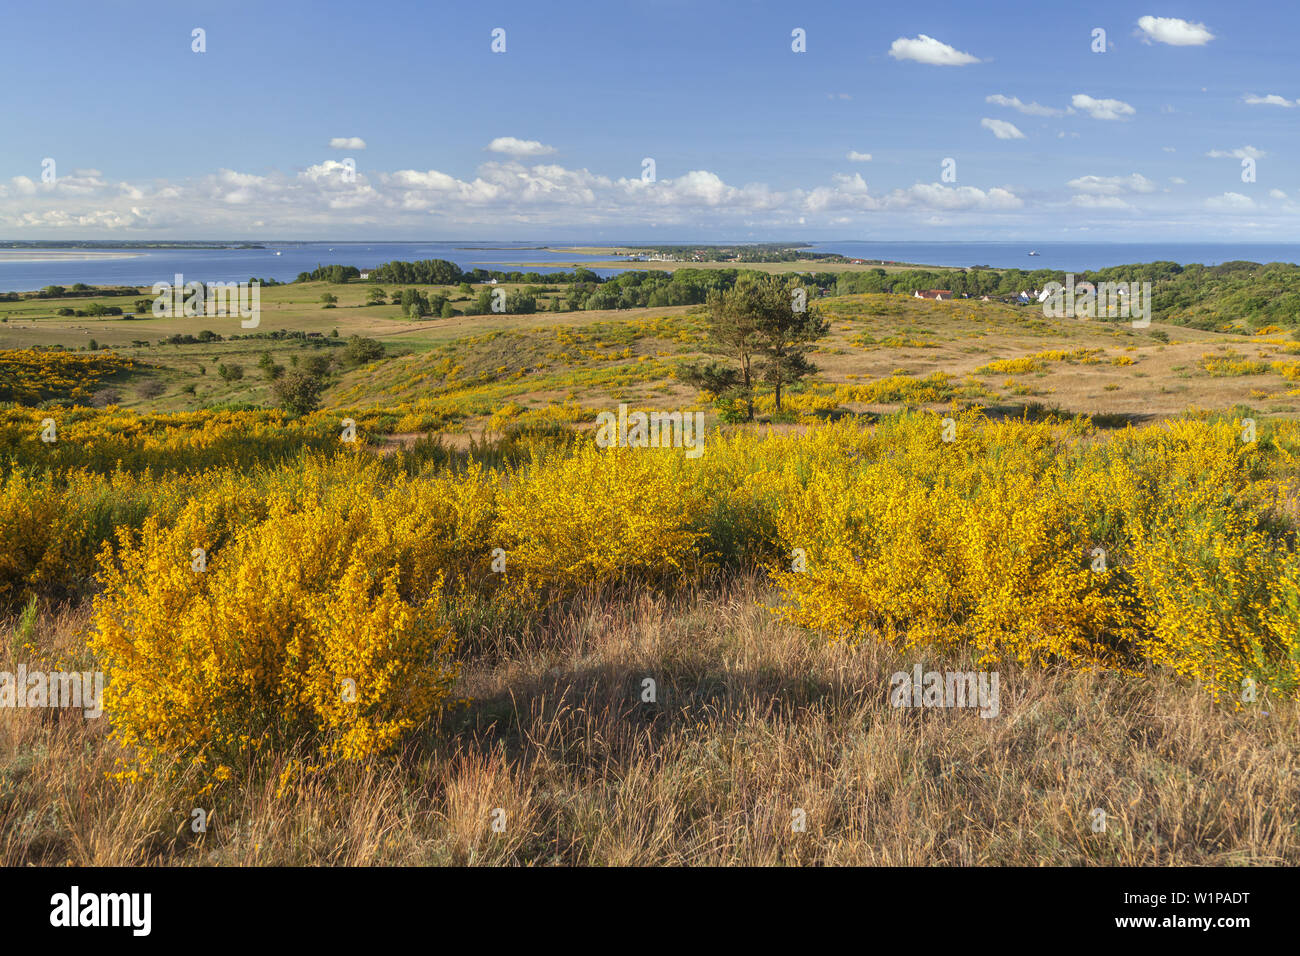 View from the Inselblick on the Dornbusch near Kloster, Island Hiddensee, Baltic coast, Mecklenburg-Western Pomerania, Northern Germany, Germany, Euro Stock Photo